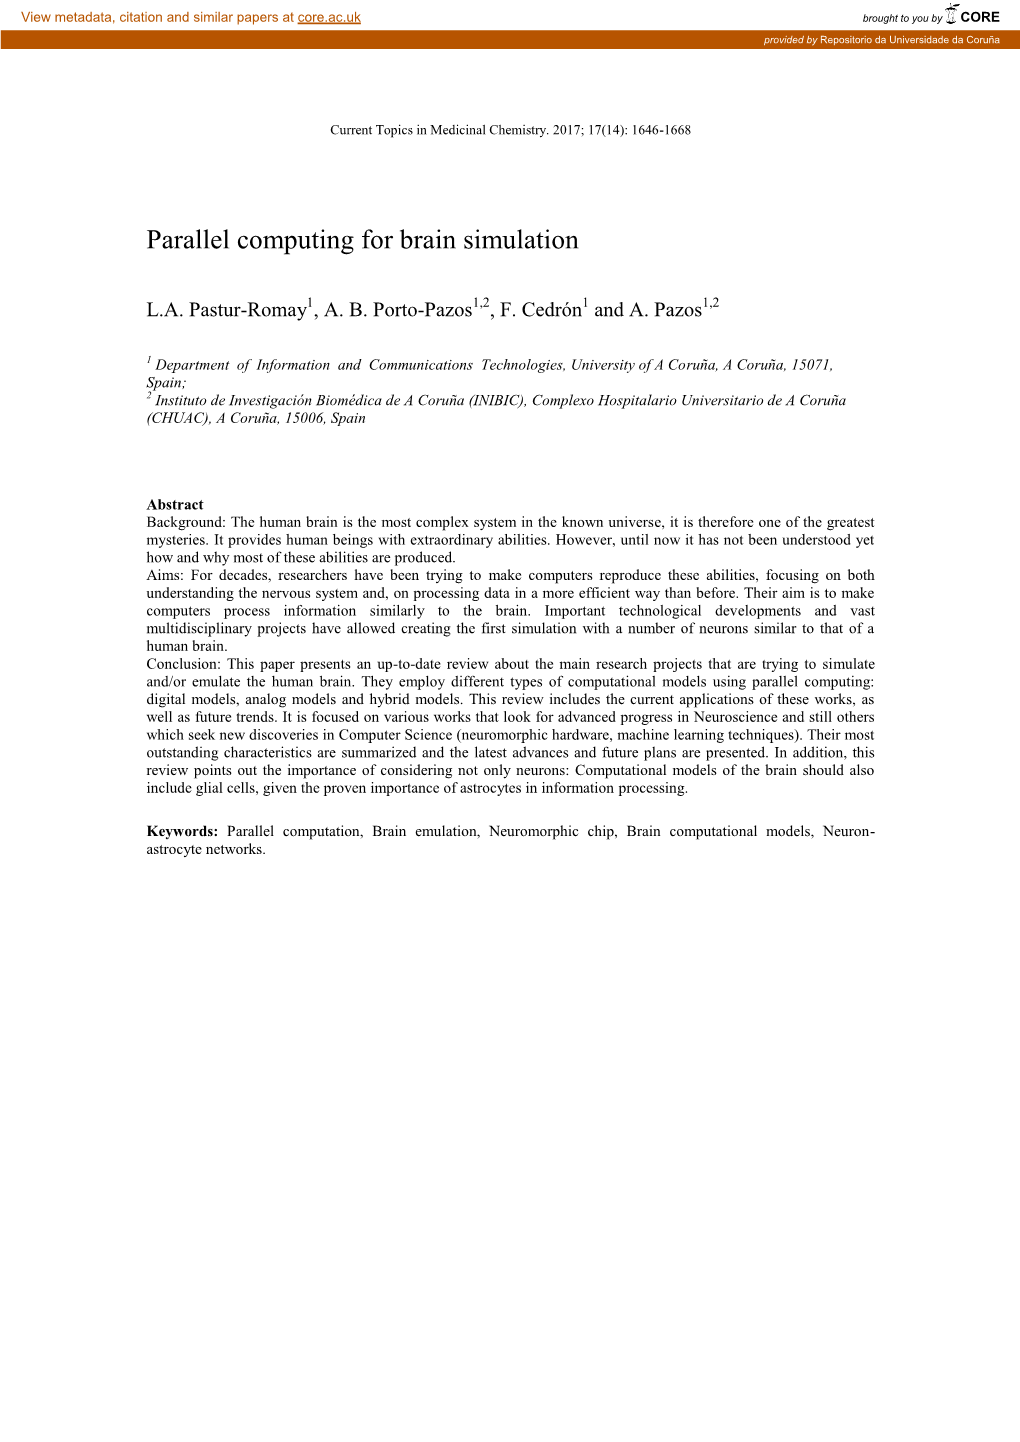 Parallel Computing for Brain Simulation